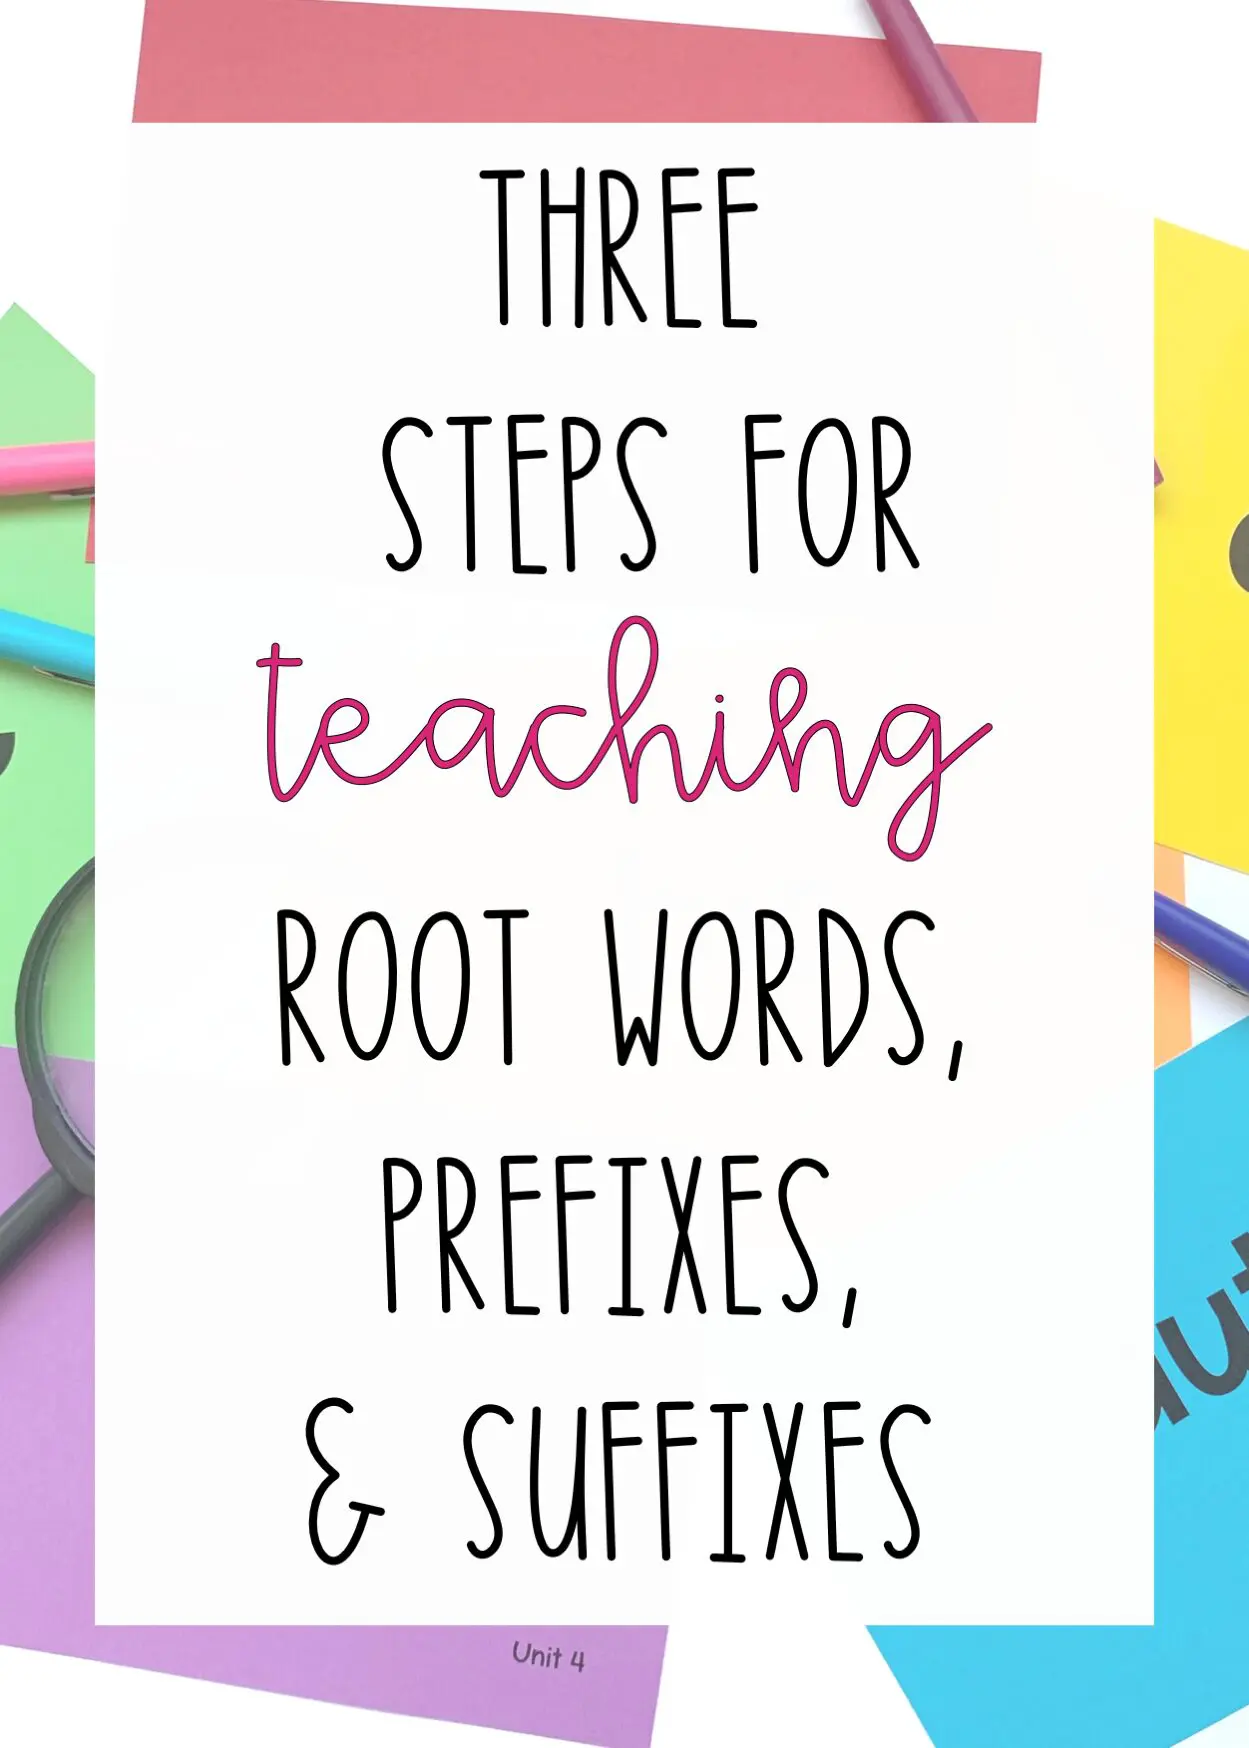 3 Steps for Teaching Root Words, Prefixes, and Suffixes